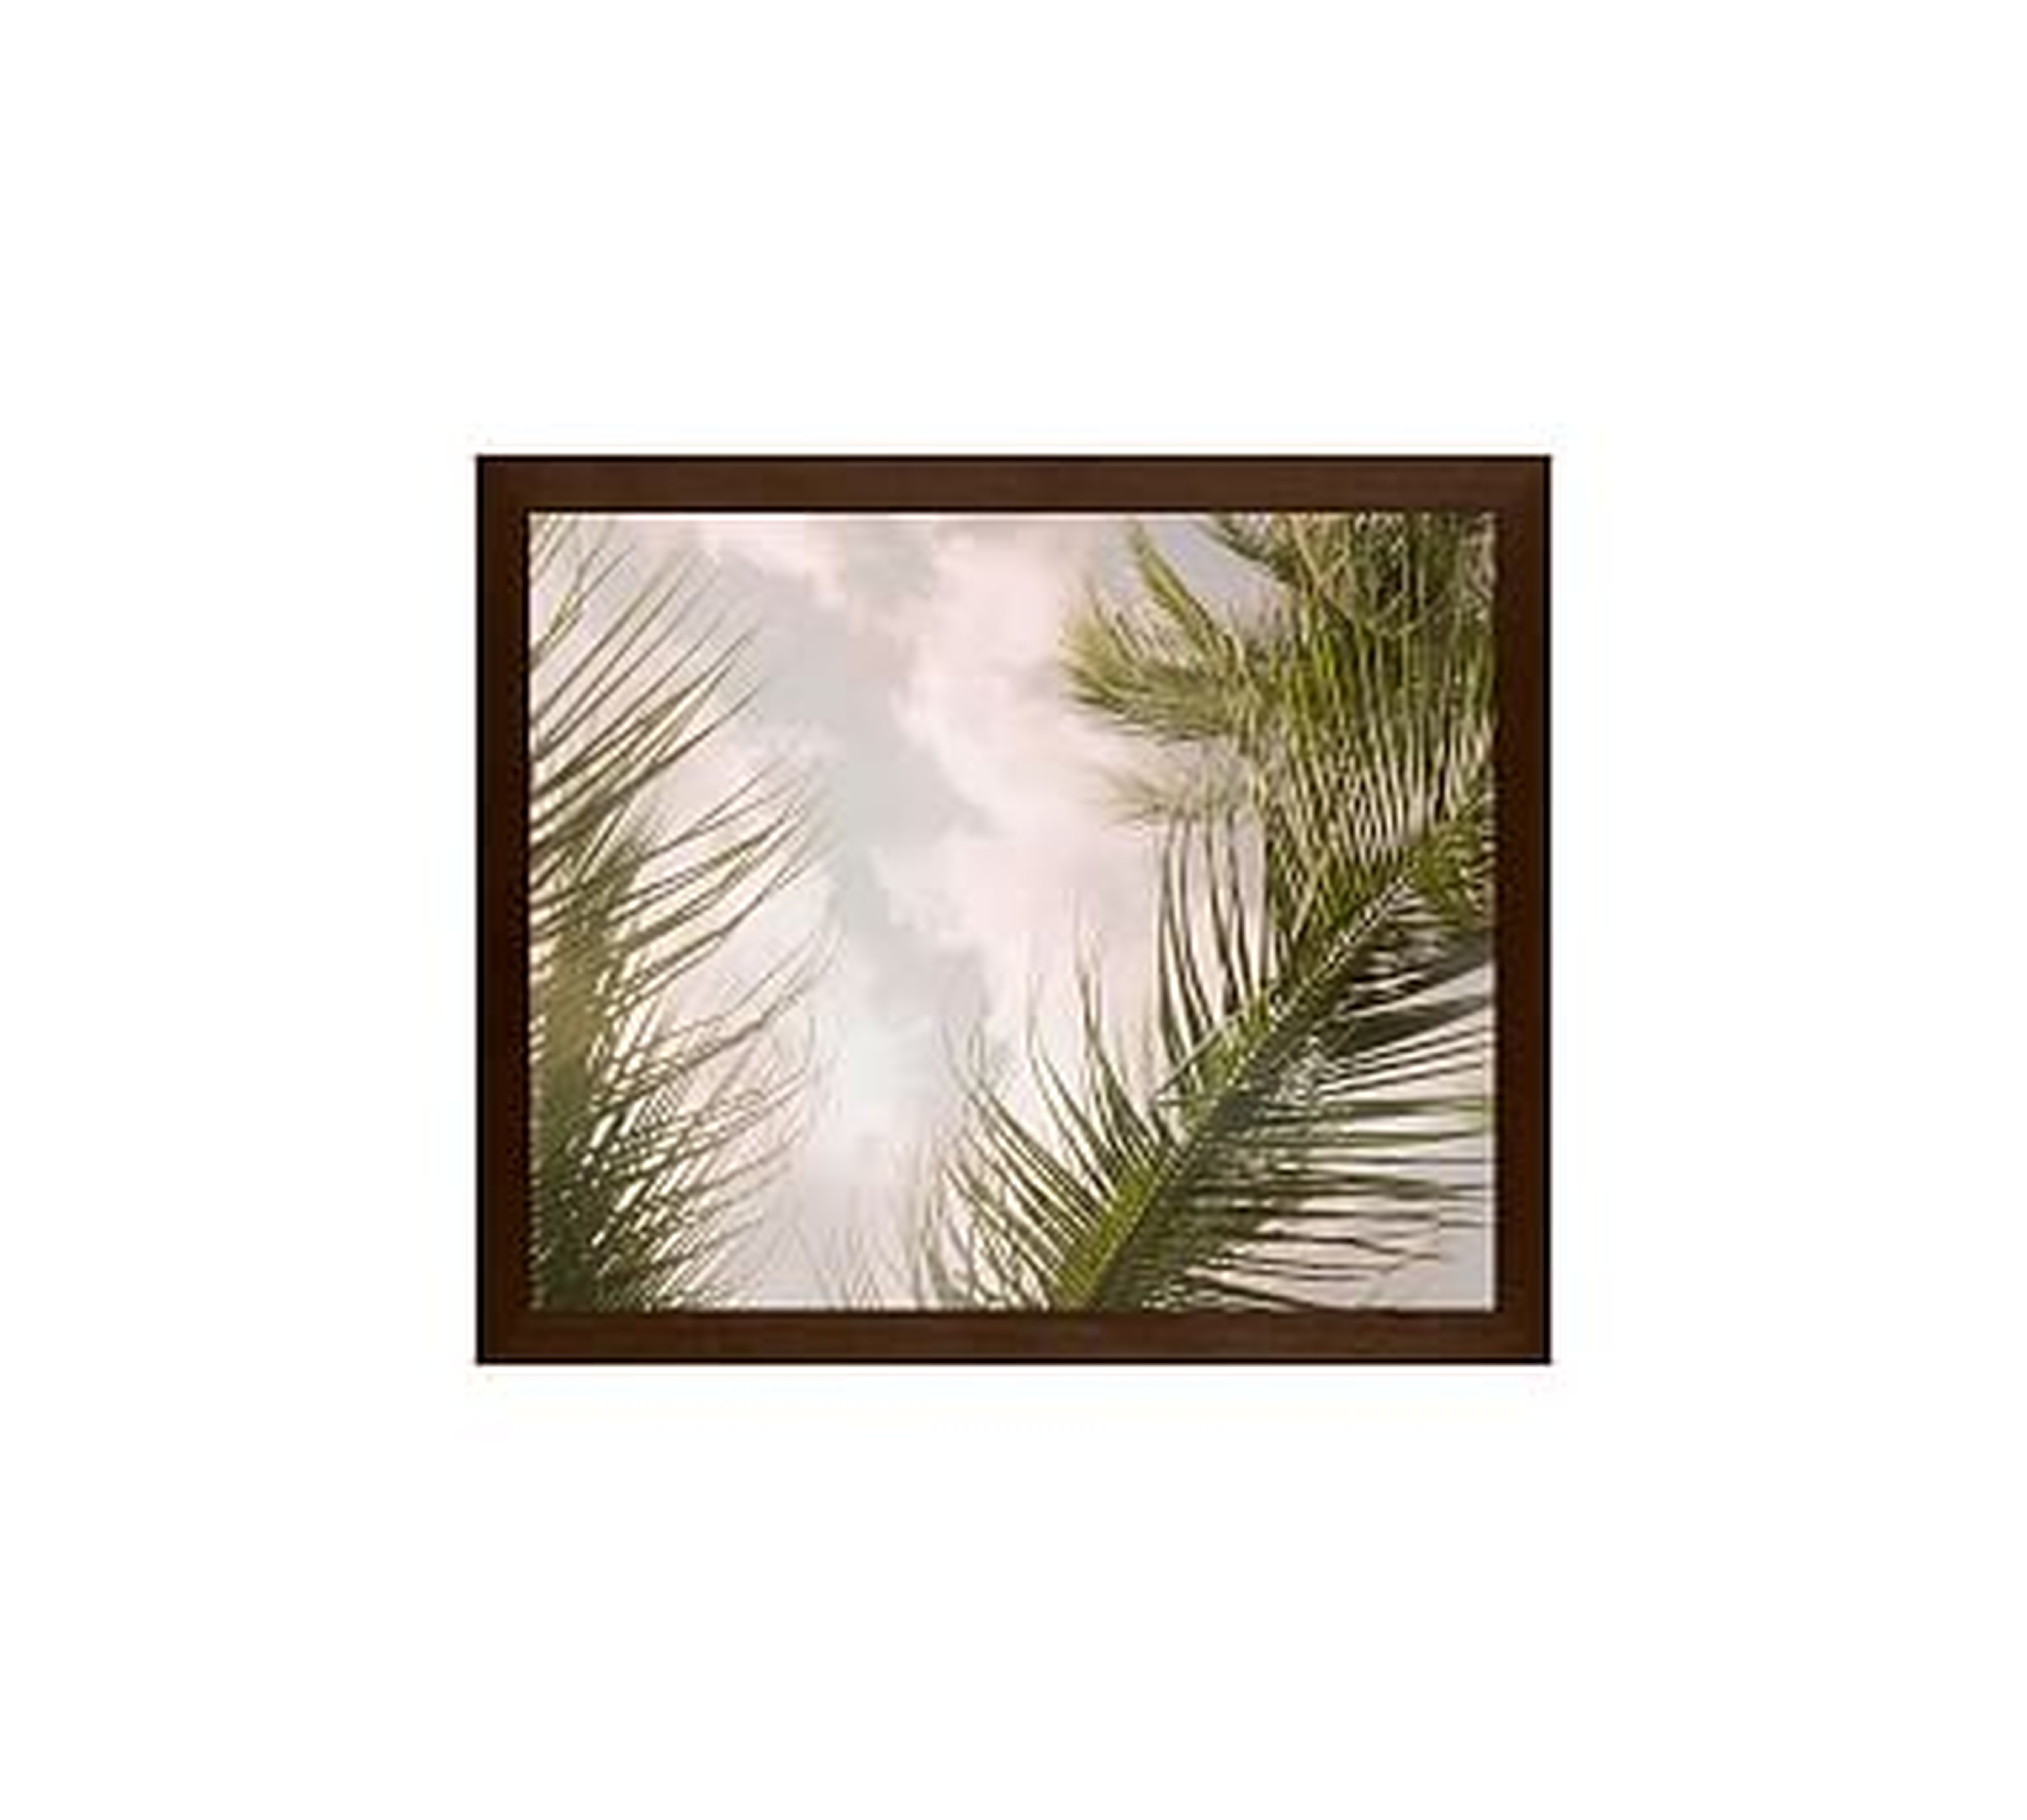 Airy Palm Tree Framed Print by Jane Wilder, 11x13", Wood Gallery Frame, Espresso, No Mat - Pottery Barn